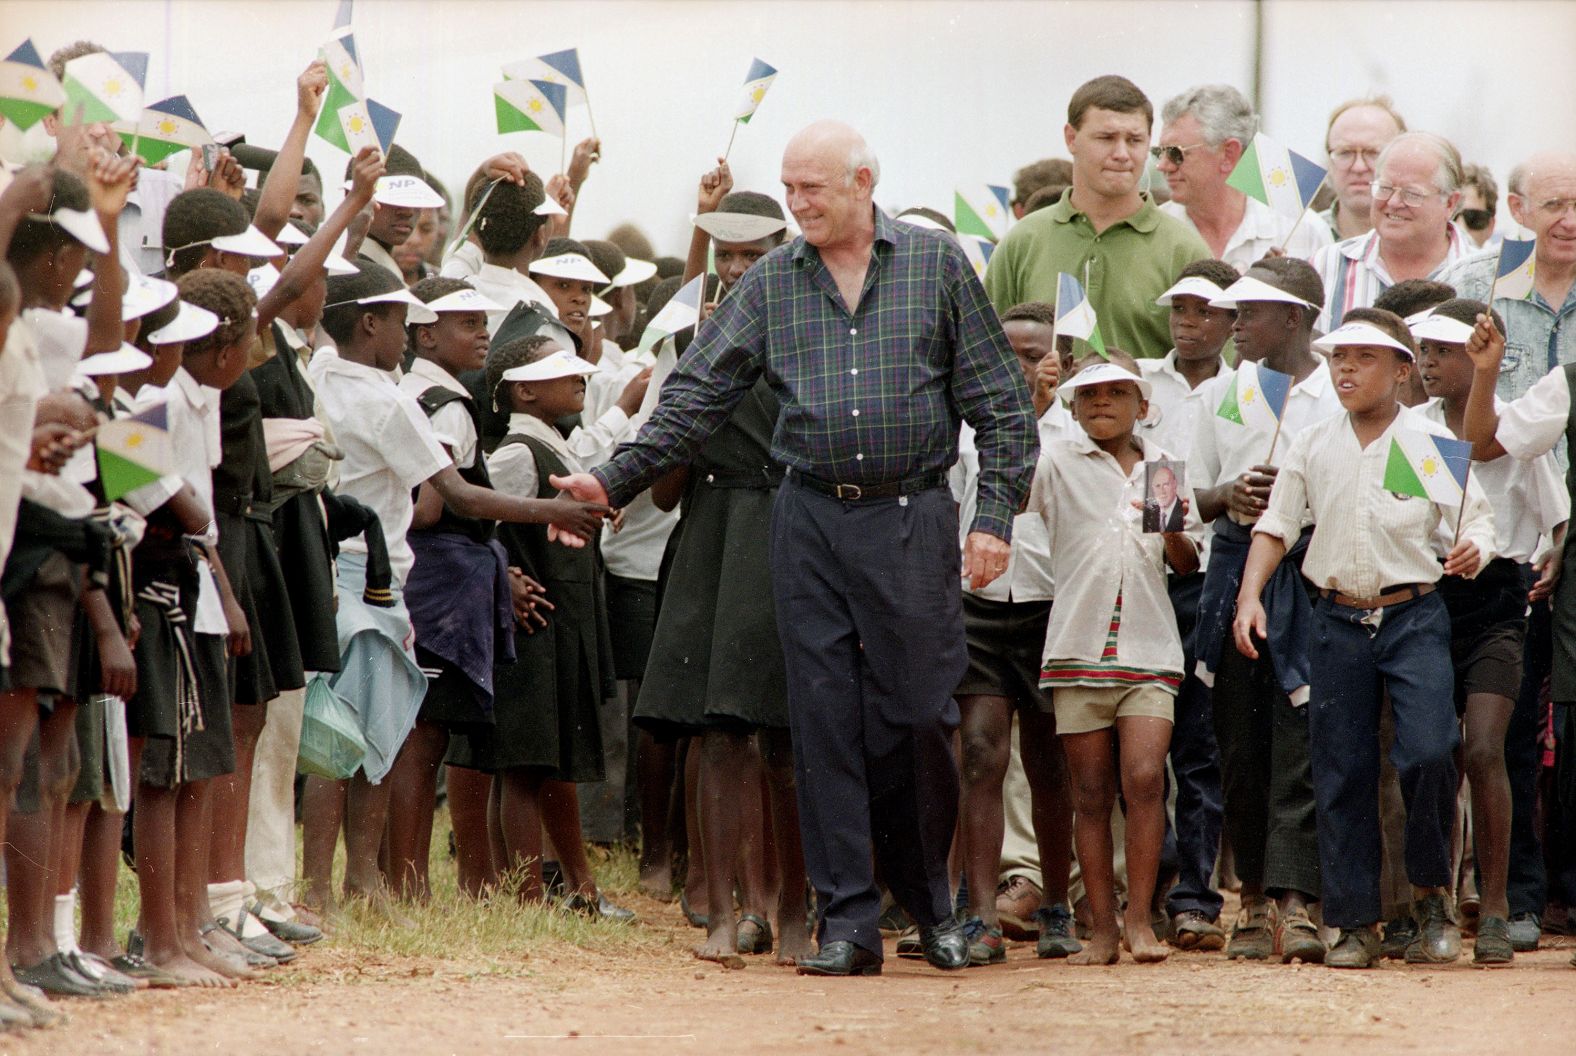 De Klerk shakes hands with schoolchildren before a campaign rally on January 21, 1994, with farm workers, farmers and children in Dwarsfontein, South Africa.